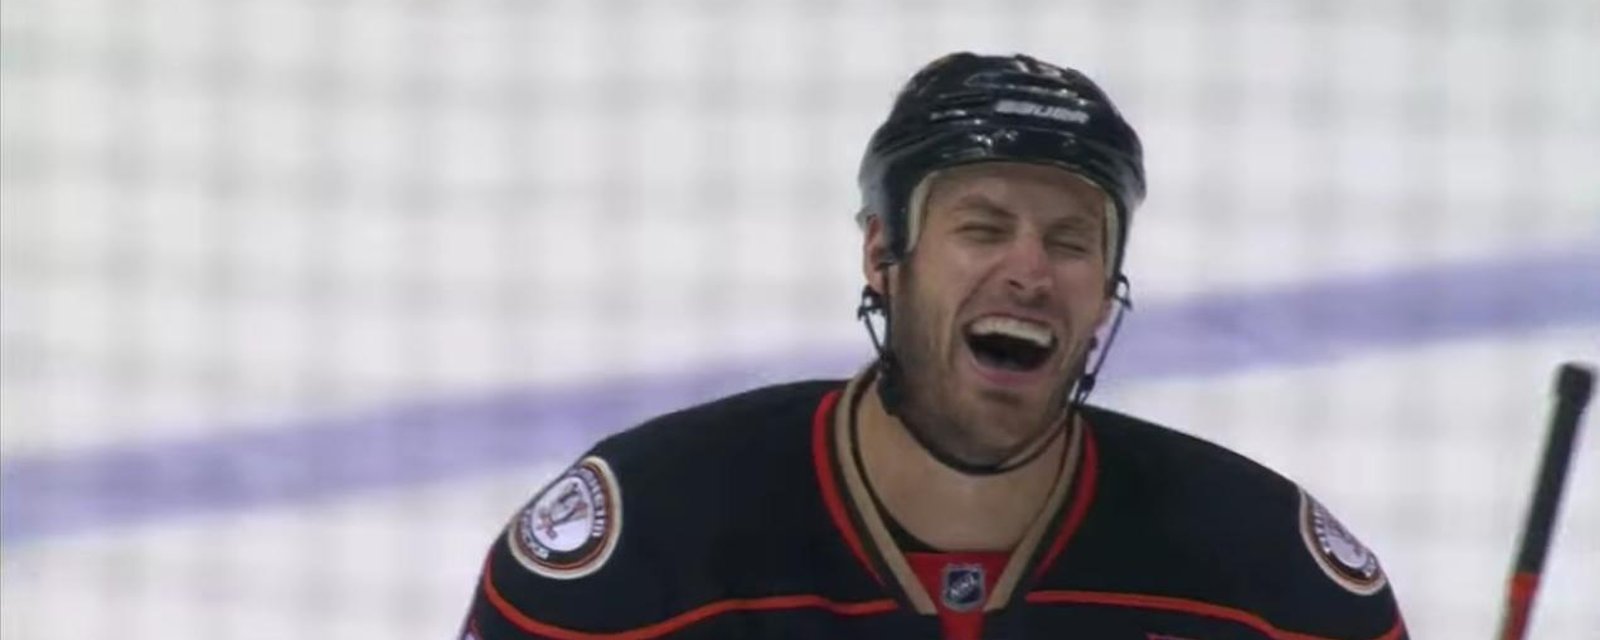 MUST SEE : Getzlaf goes crazy, contributes to 4 goals. 